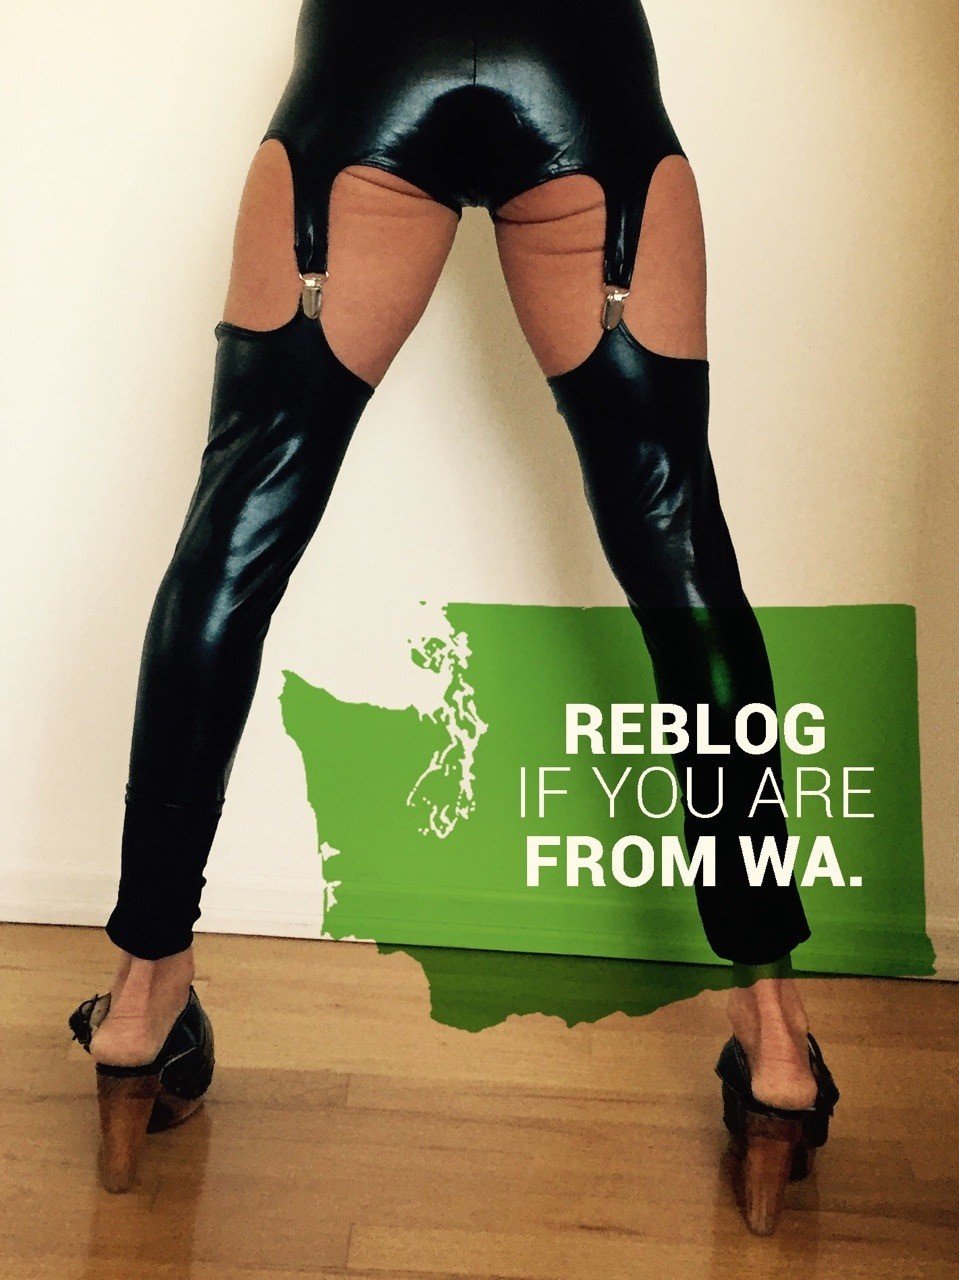 Watch the Photo by Little Slut's Daddy with the username @MakinHerSquirt, posted on October 2, 2019. The post is about the topic Washington State Freaks.